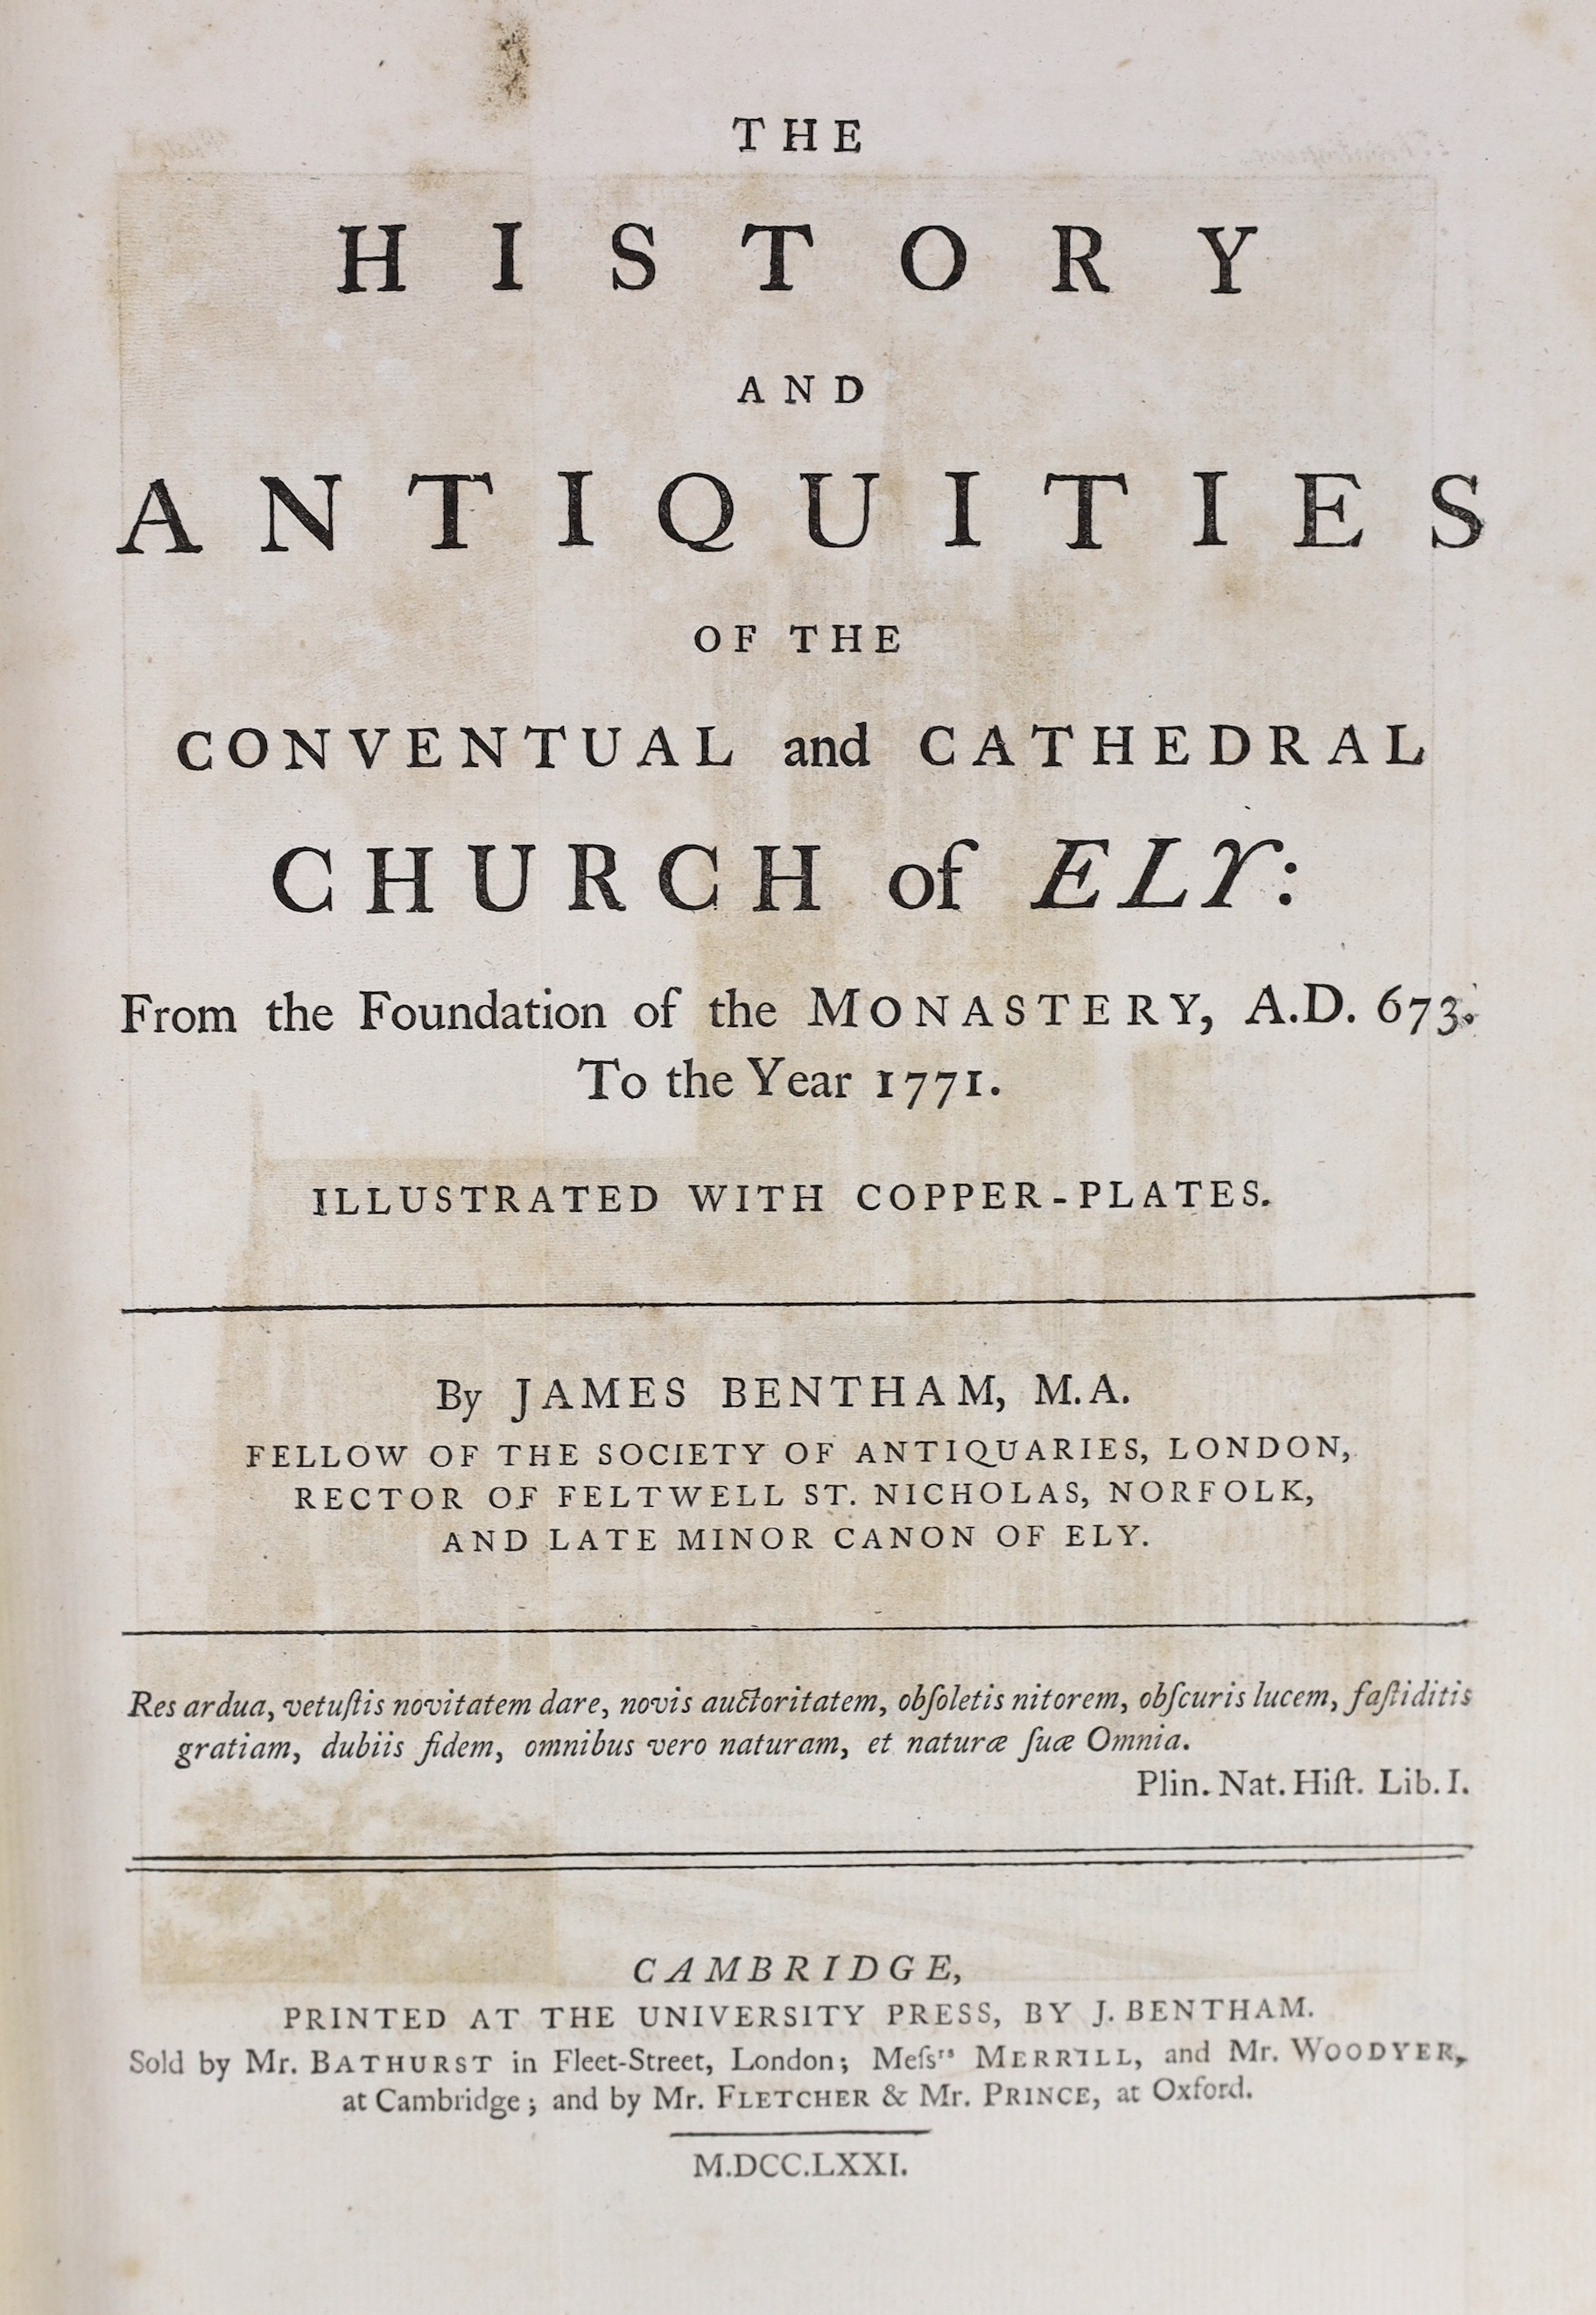 CAMBS: Bentham, James - The History and Antiquities of the Conventual and Cathedral Church of Ely ... 45 plates (some folded), text engravings, subscribers list; contemp. calf, gilt-decorated and panelled spine, roy. 4to